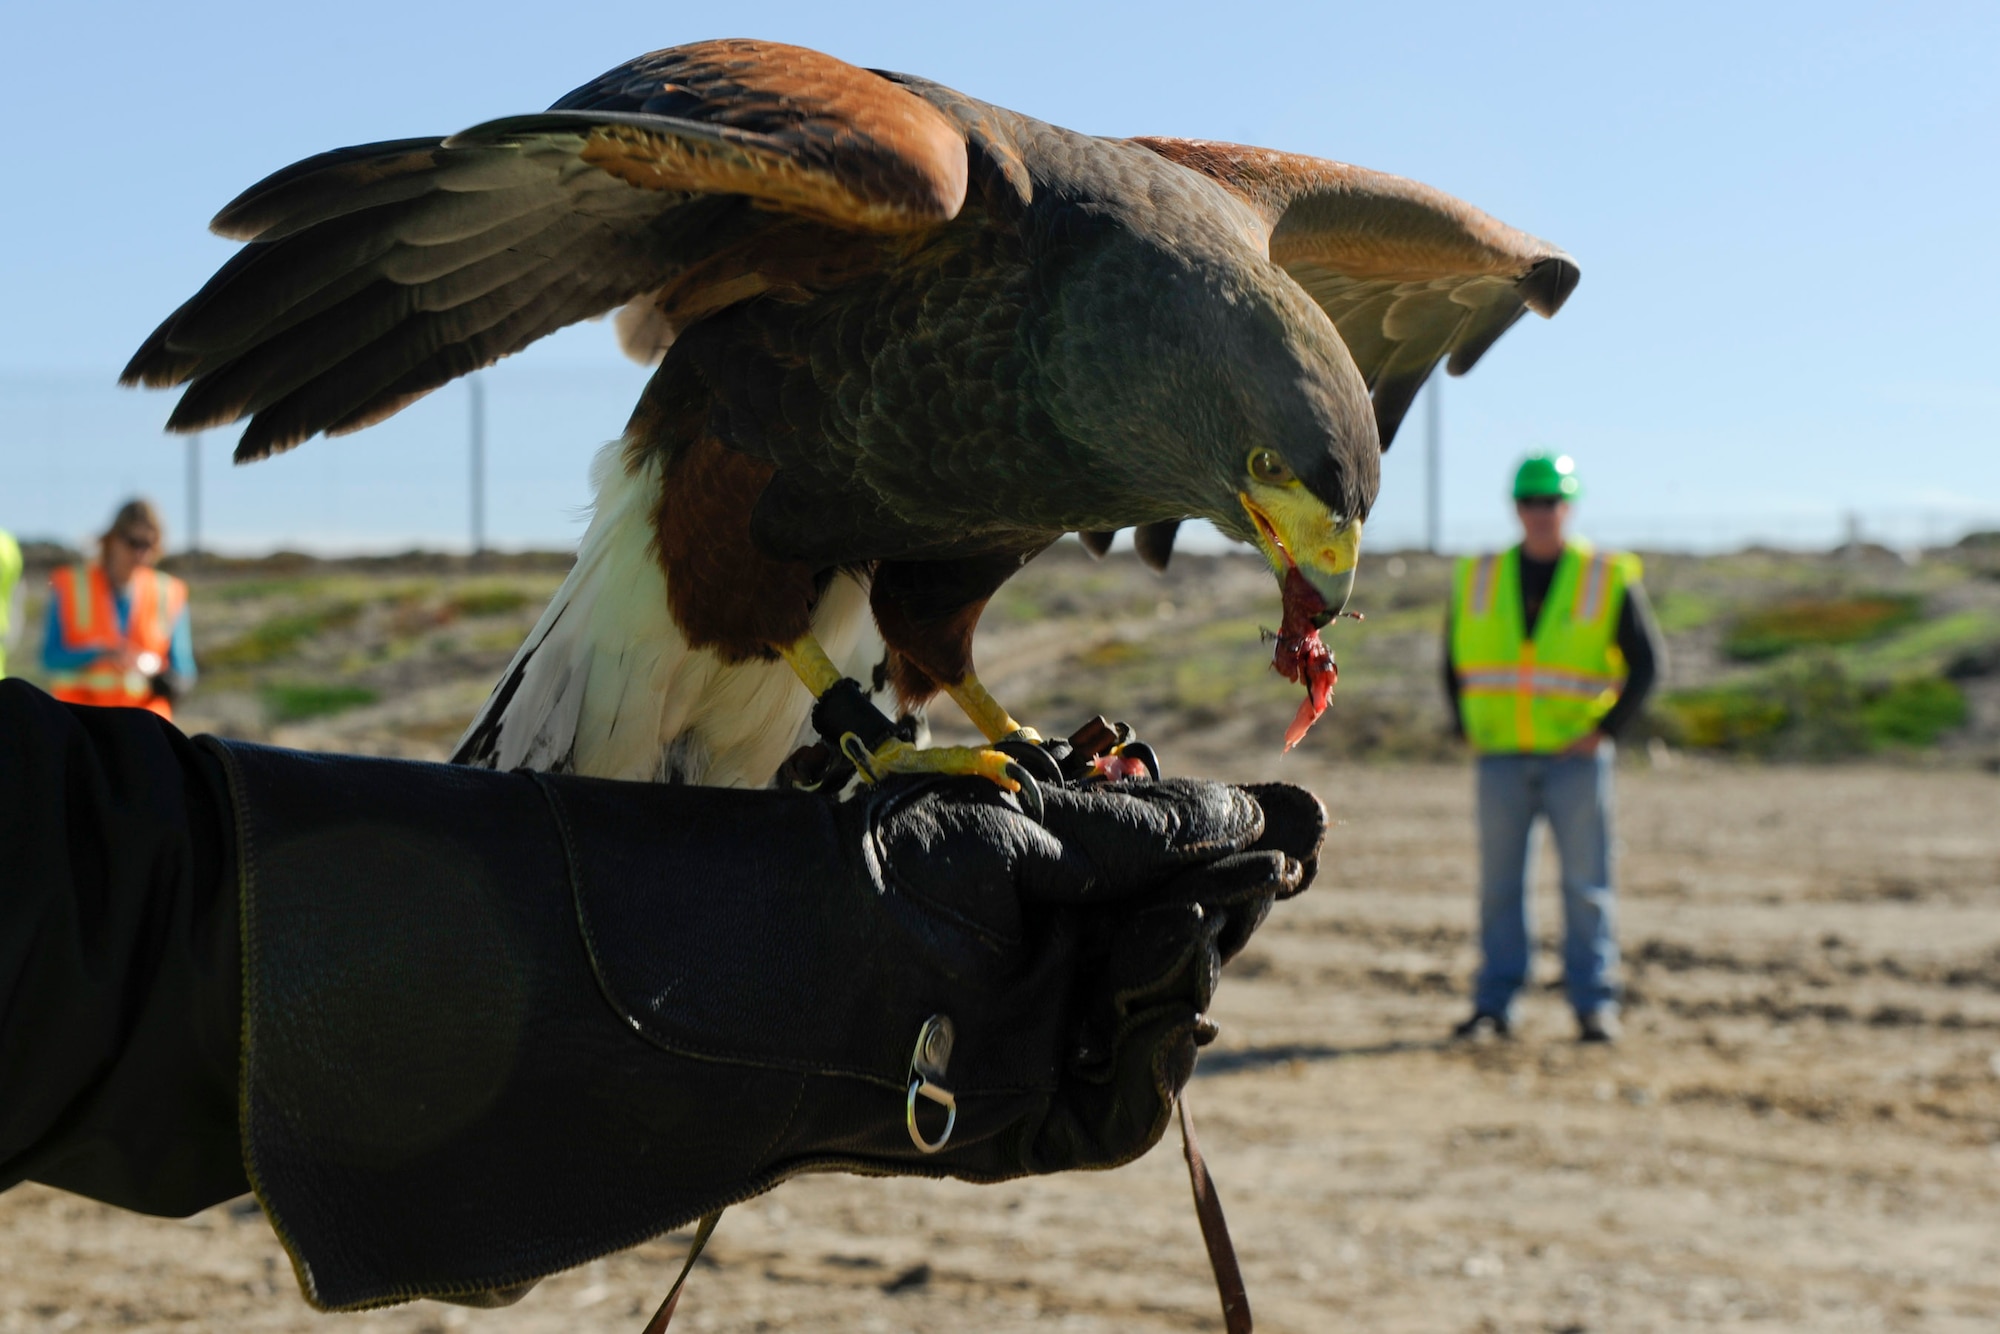 VANDENBERG AIR FORCE BASE, Calif. -- A hawk eats a meaty treat at the landfill here Wednesday, Nov. 23, 2011. Falconers from Safari Depredation Company visit the landfill daily to help prevent animals, like seagulls and other birds, from moving the refuse to other areas of the base and to help keep landfill workers safe. While the hawks are intimidating to many of the small animals in the area, they still have to be careful for local territorial predators. (U.S. Air Force photo/Col. Richard Boltz)
